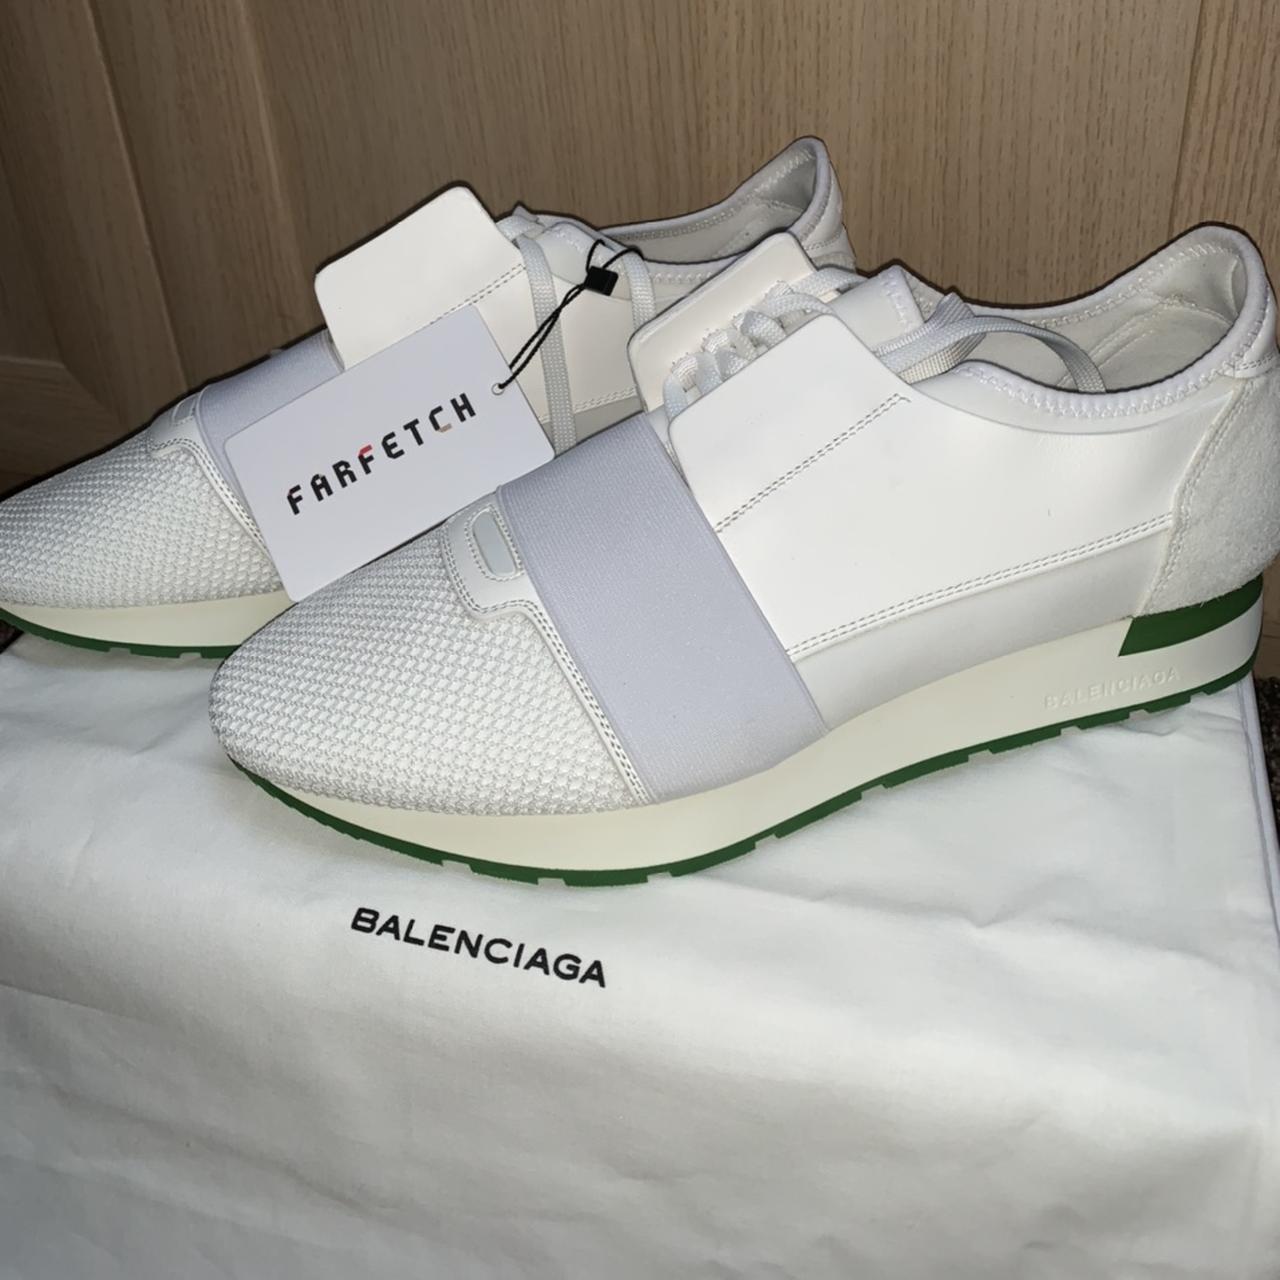 Balenciaga Race Runners Sneakers In Green And Brown  Your Average Guy